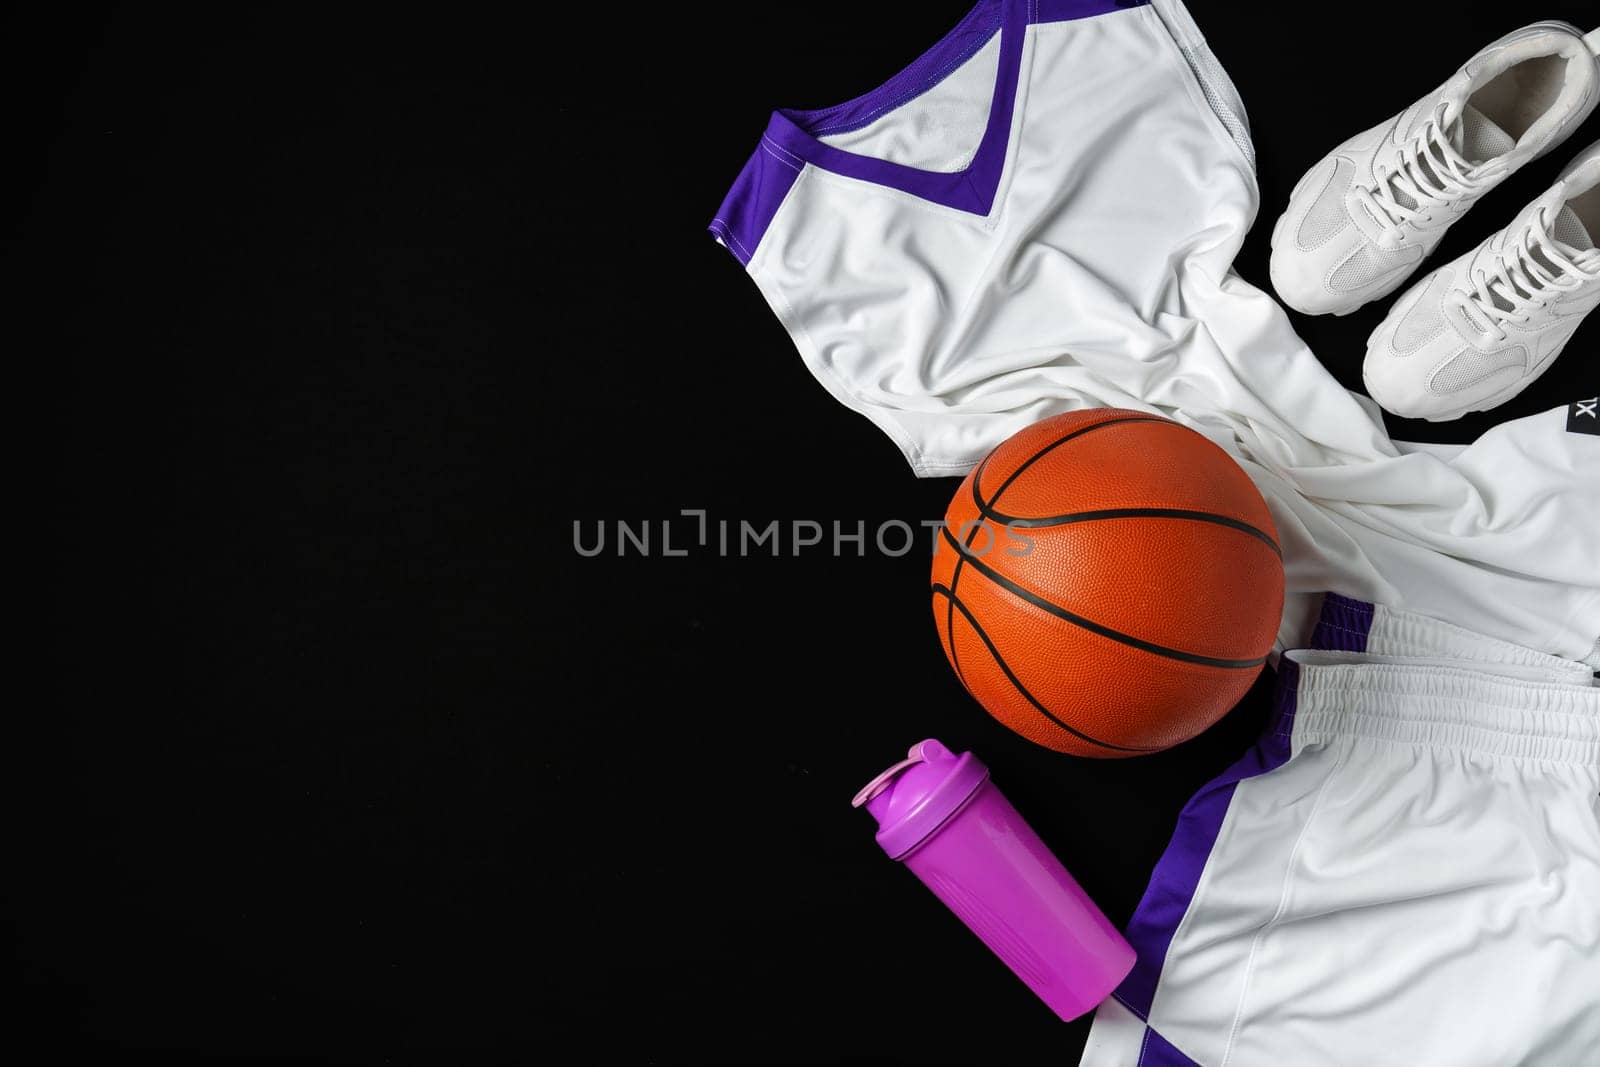 A collection of basketball essentials is neatly arranged against a stark, dark background, including a vibrant orange basketball, white sneakers with purple detailing, a white jersey with purple accents, and a purple water bottle, suggesting readiness for an athletic training session or a game.